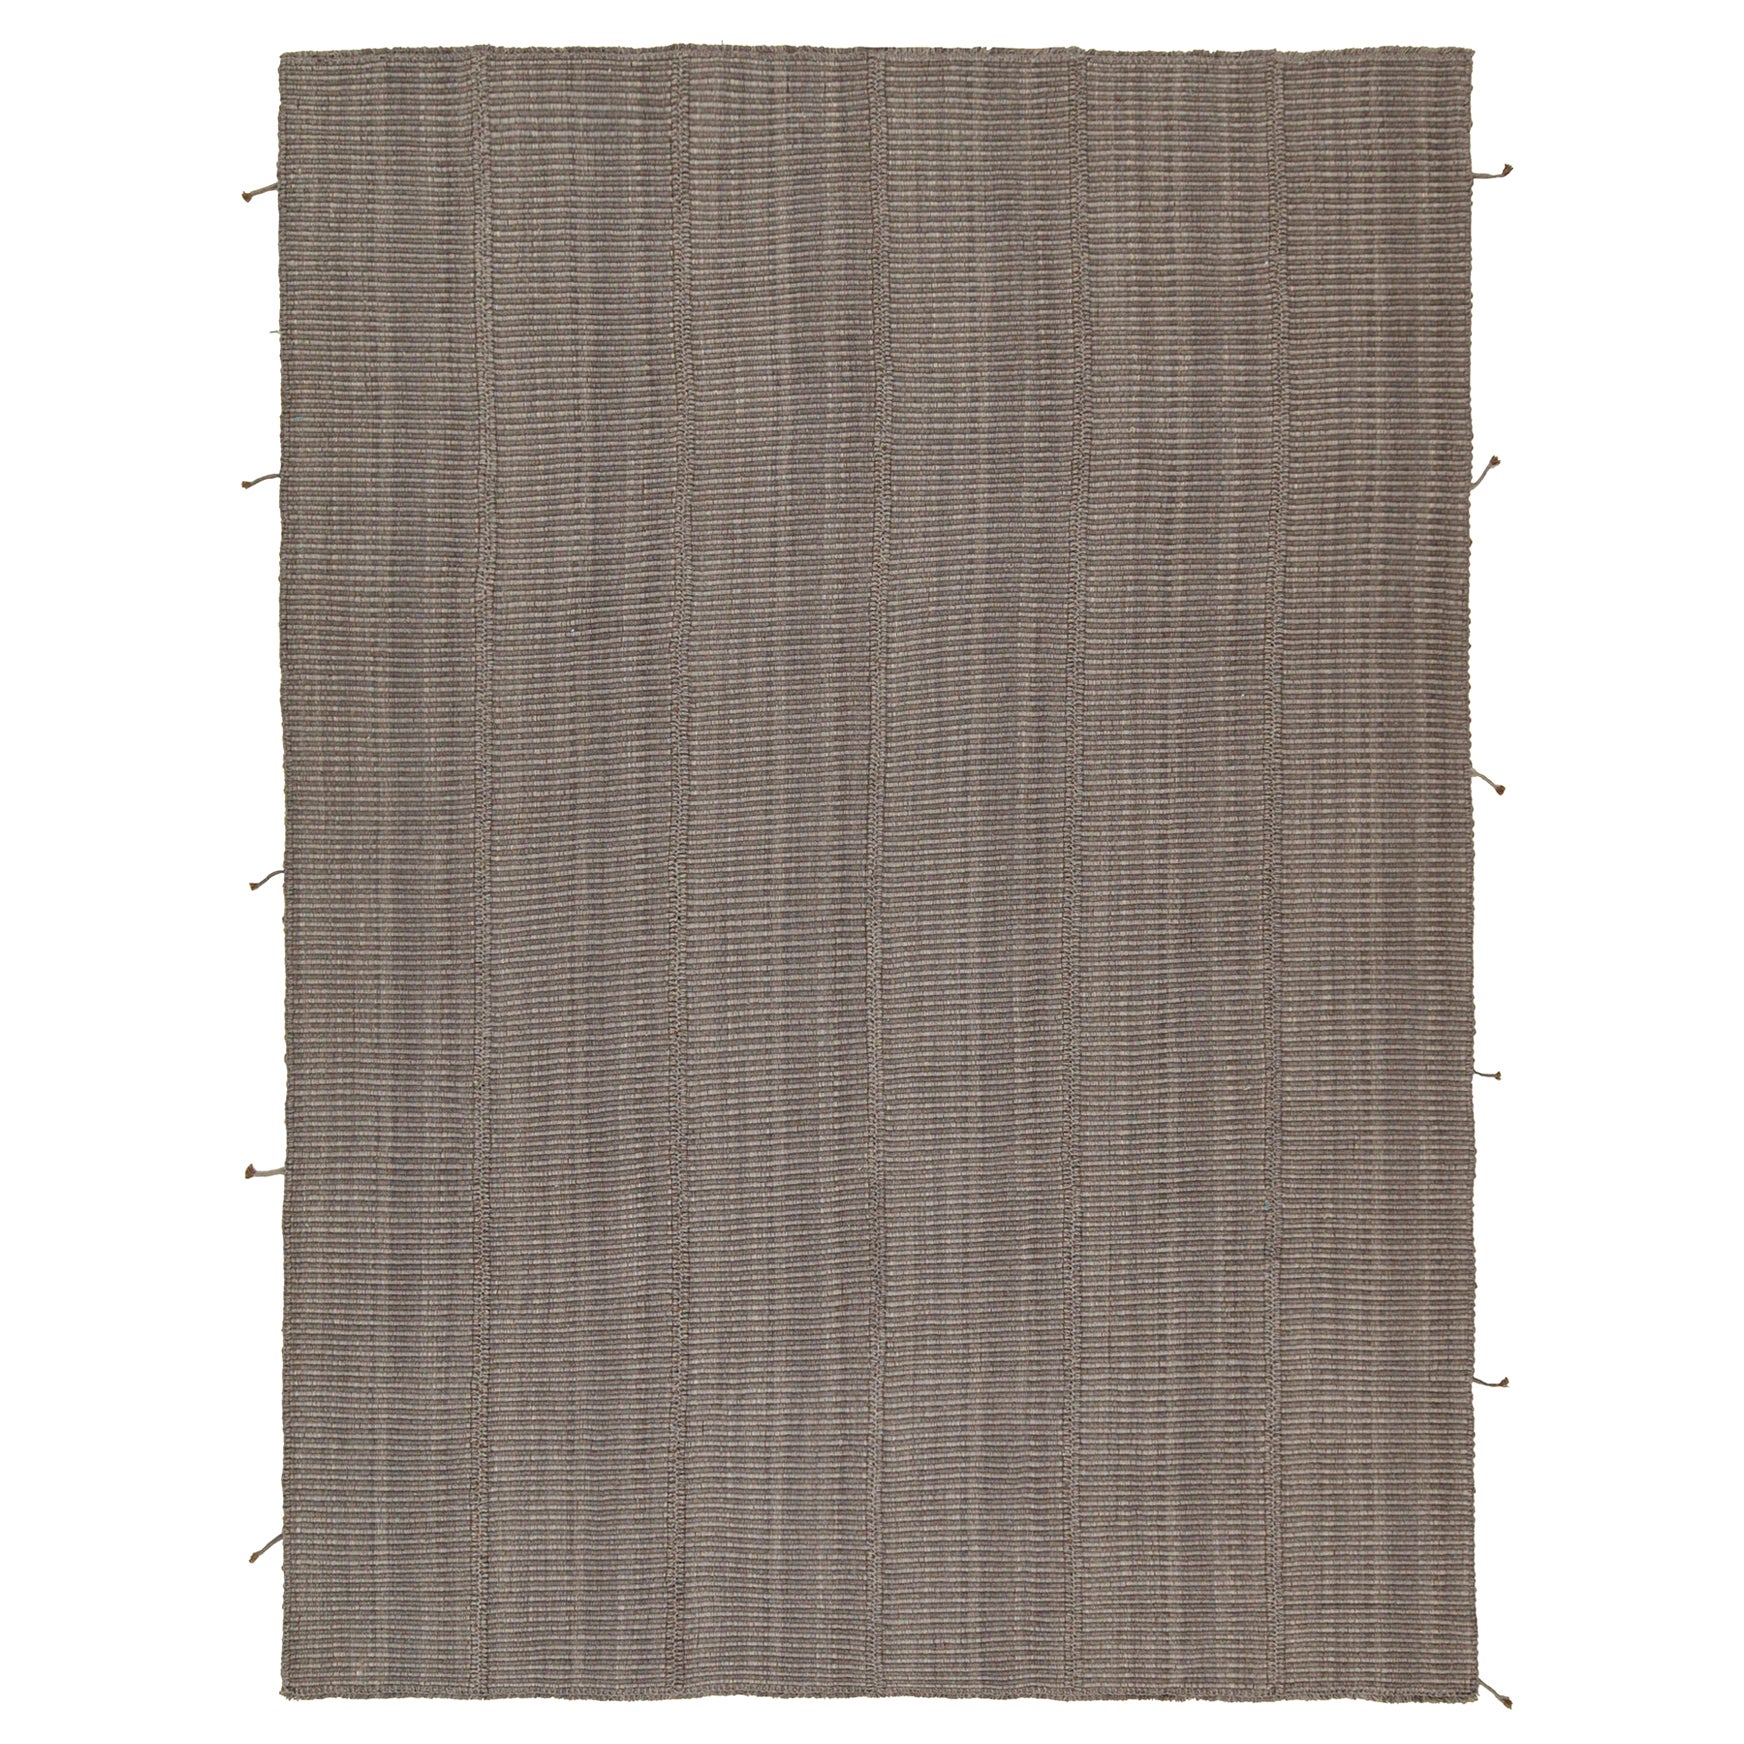 Rug & Kilim’s Contemporary Kilim Rug in Gray with Brown Accents